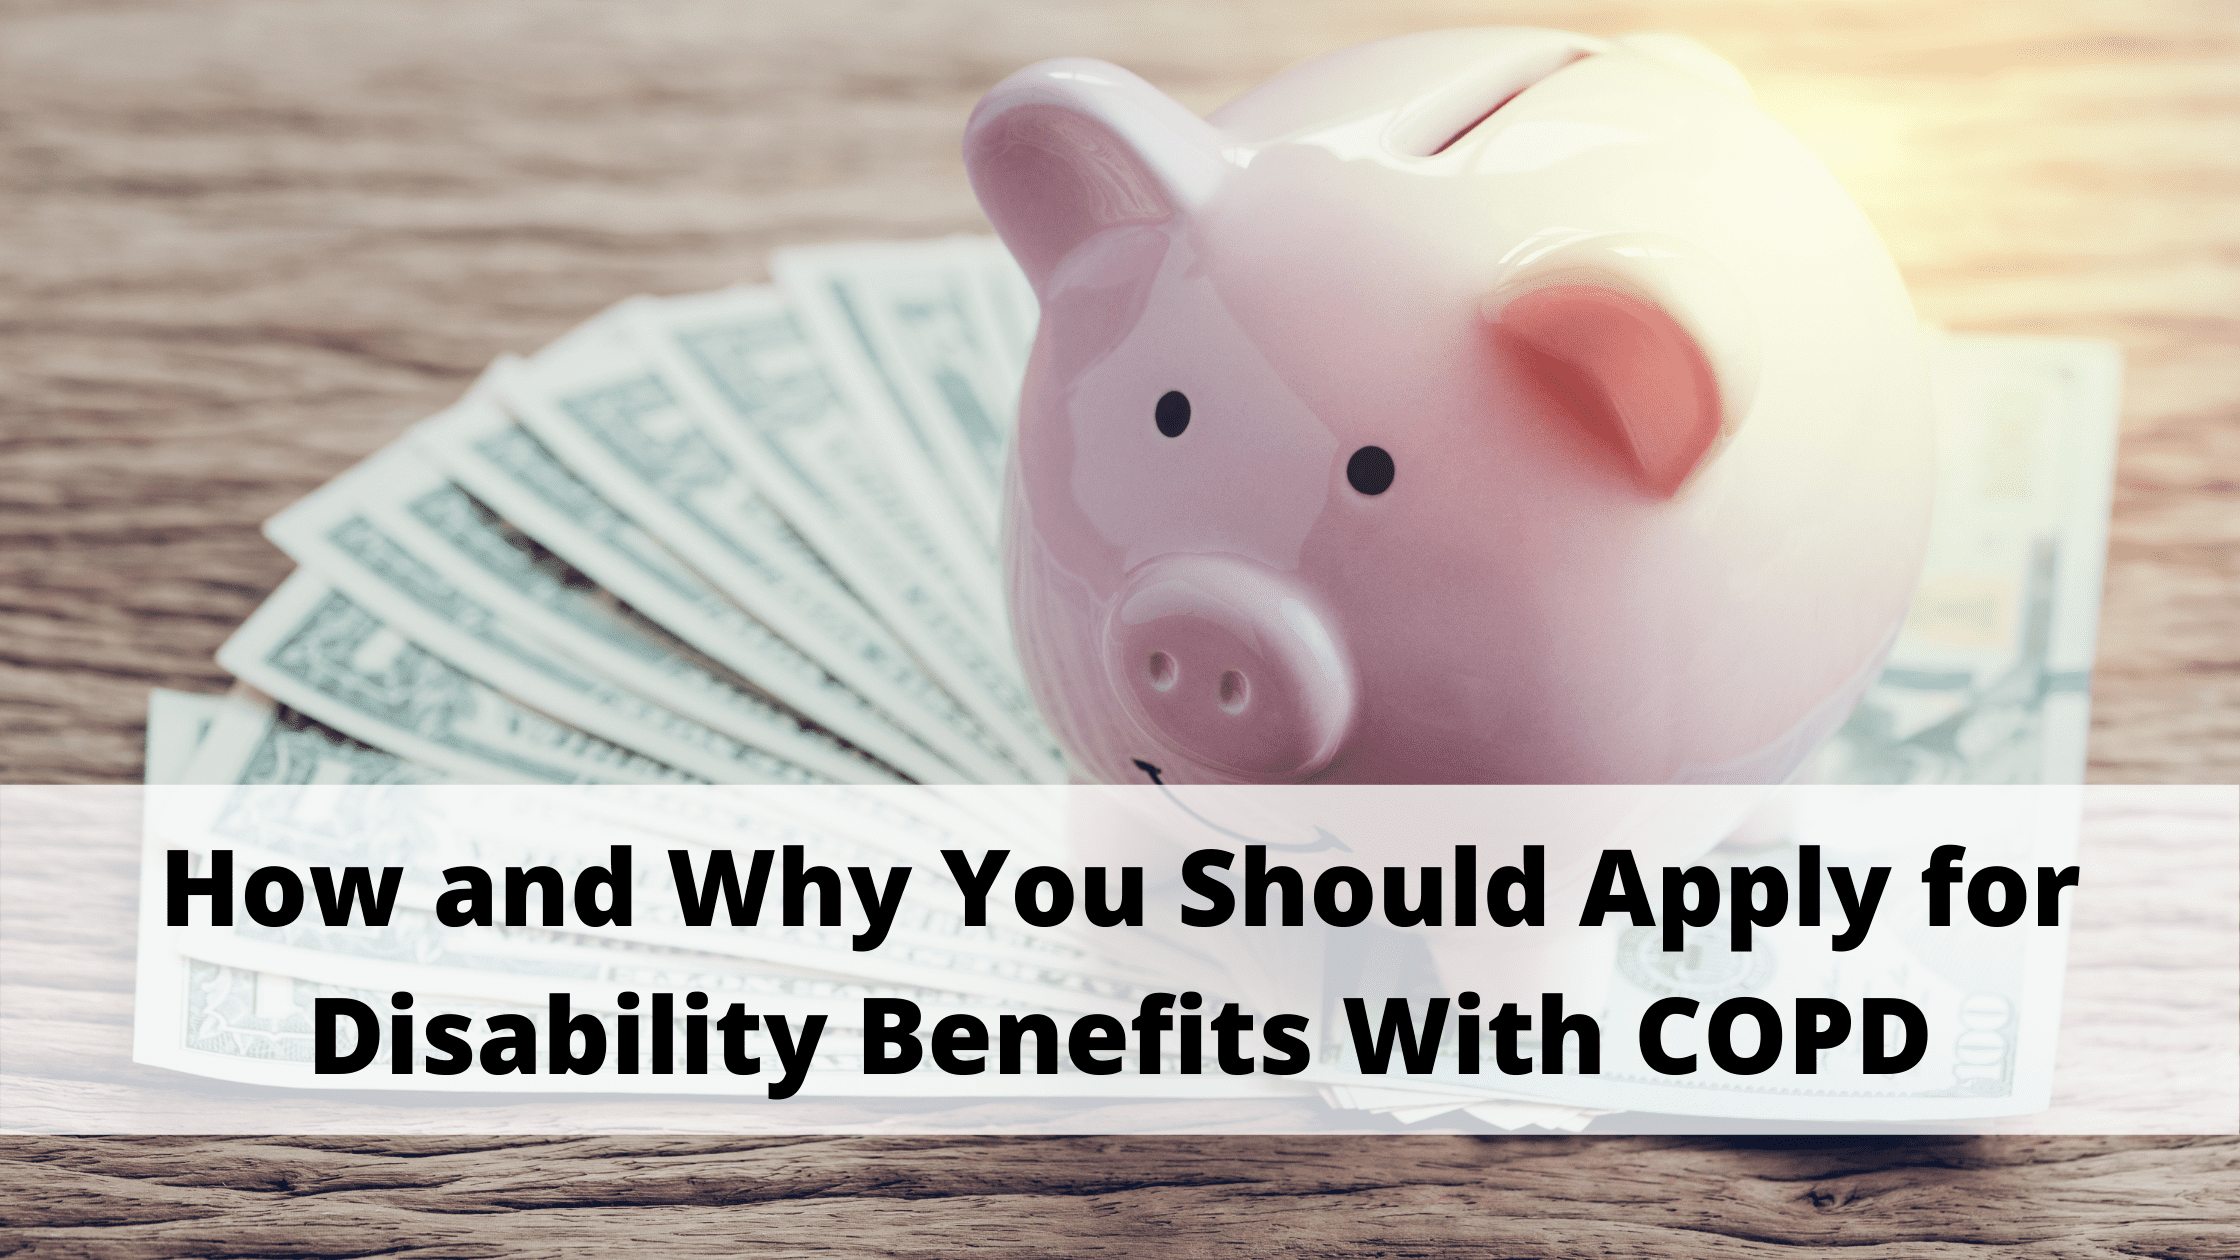 How and Why You Should Apply for Disability Benefits With COPD